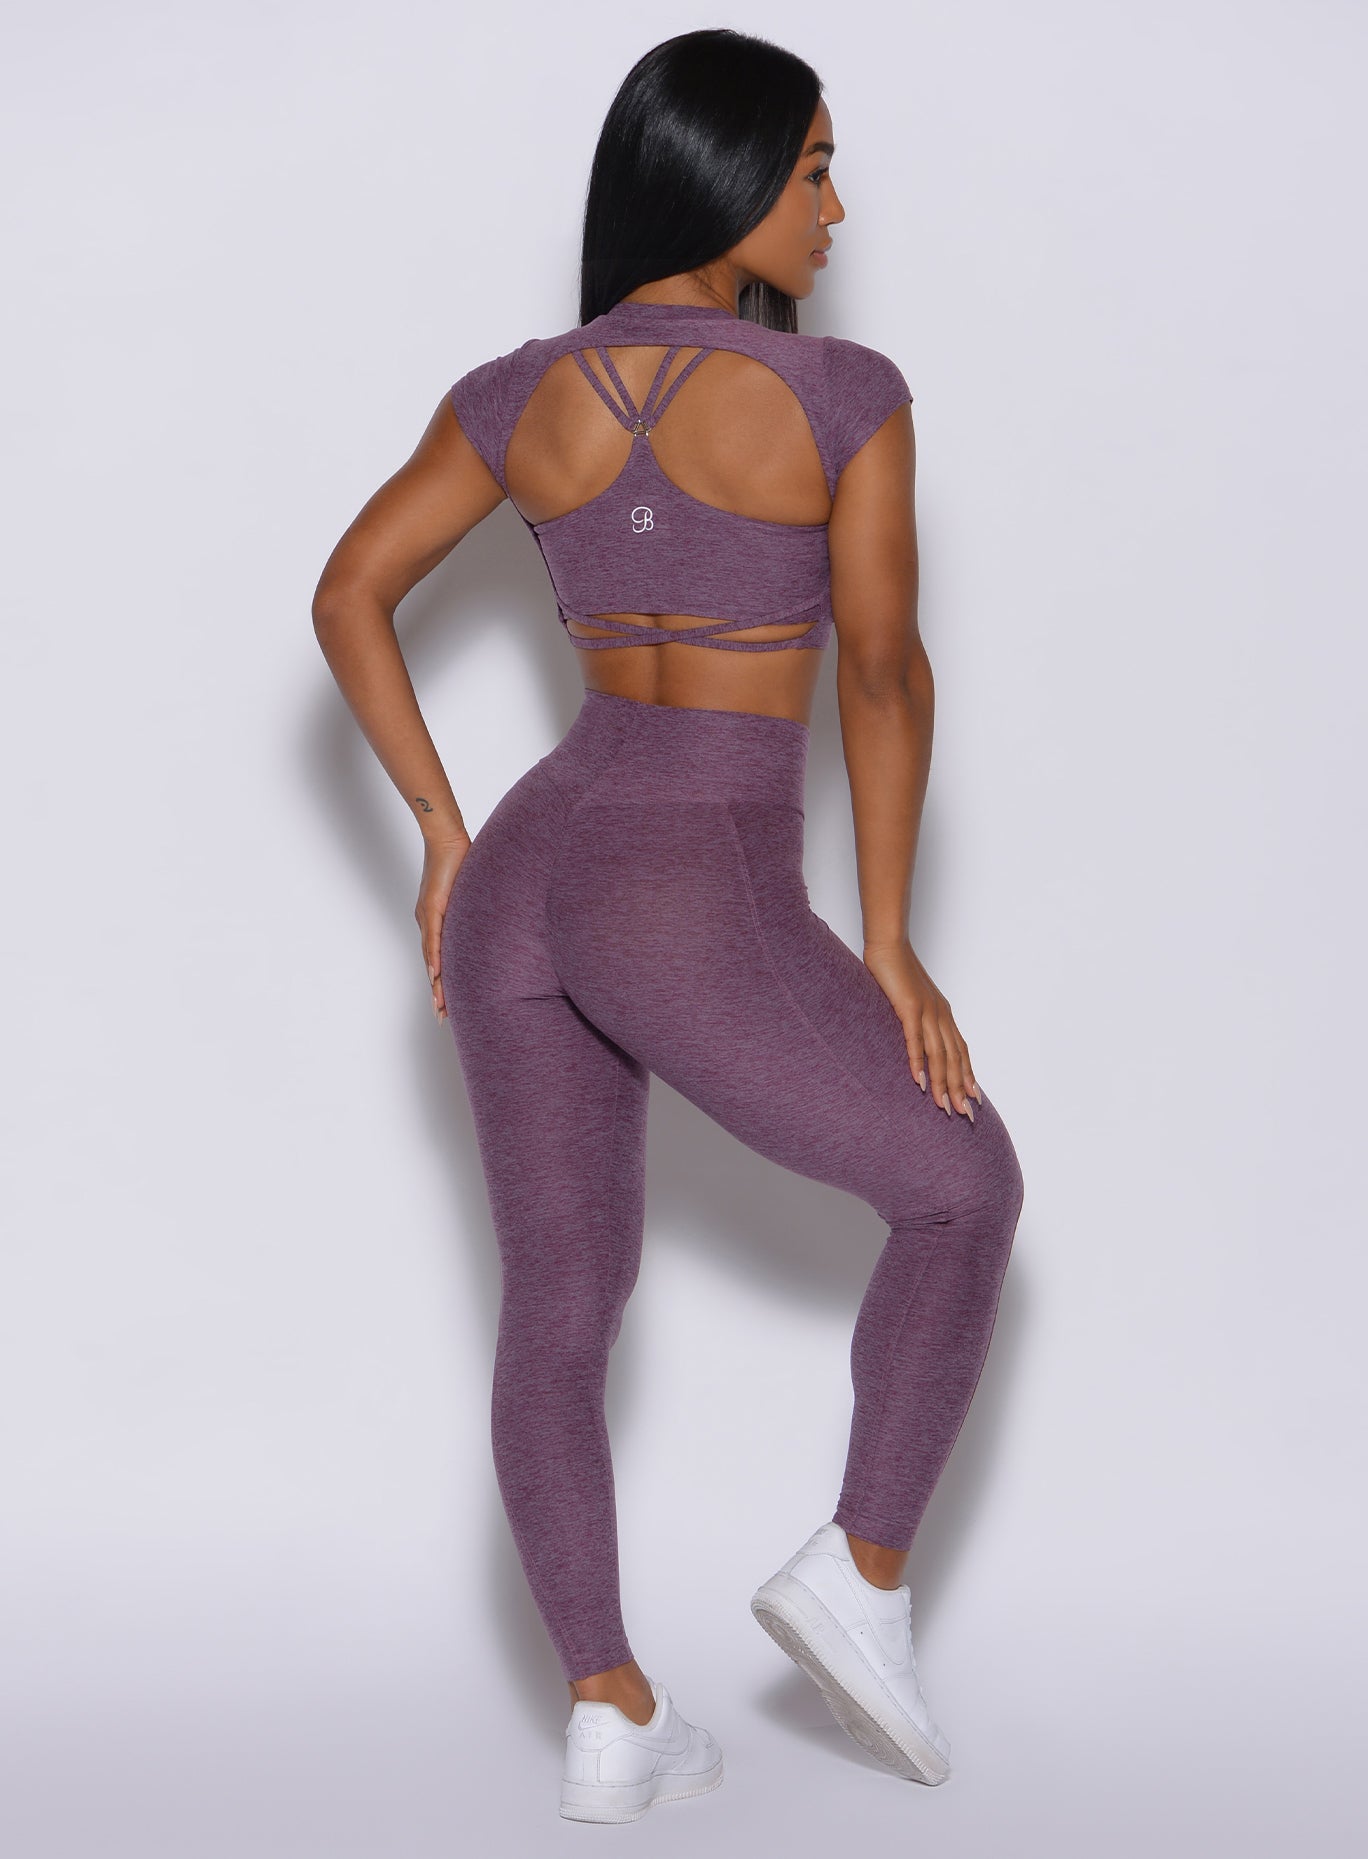 Back profile view of a model in our cloud leggings in regal purple color and a matching sports bra